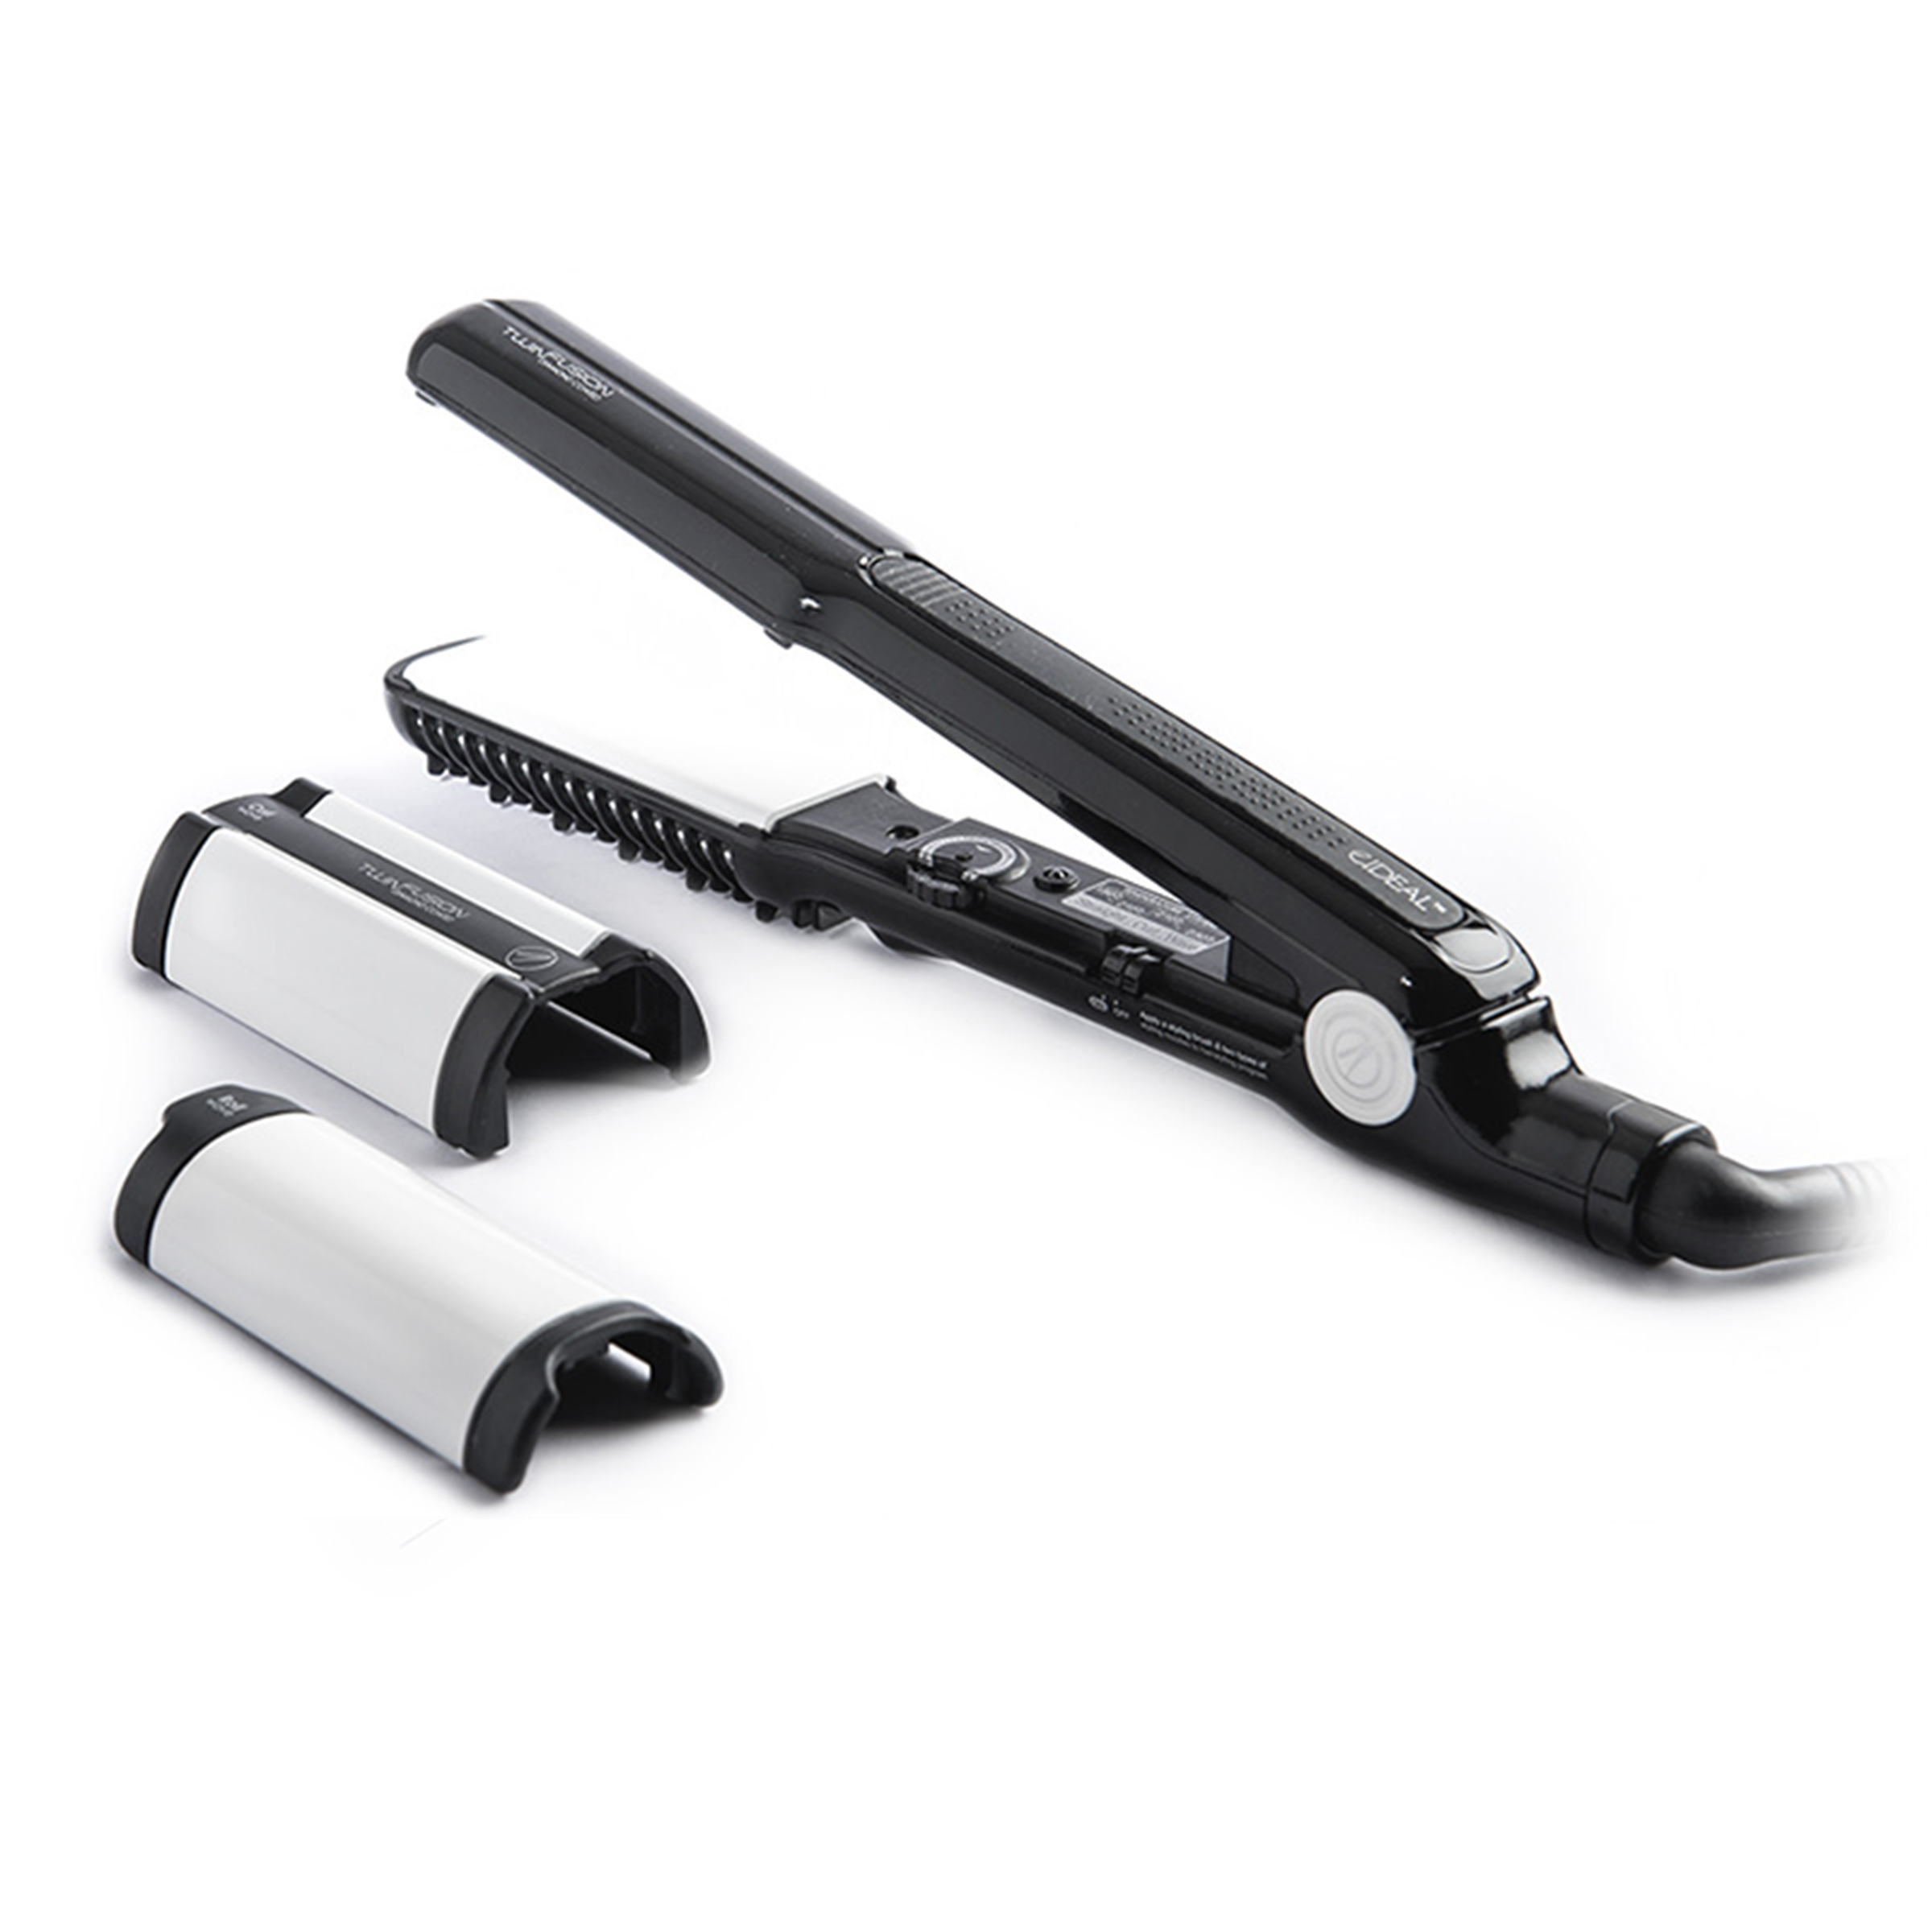 Twin Fusion Professional Flat and Curly Iron